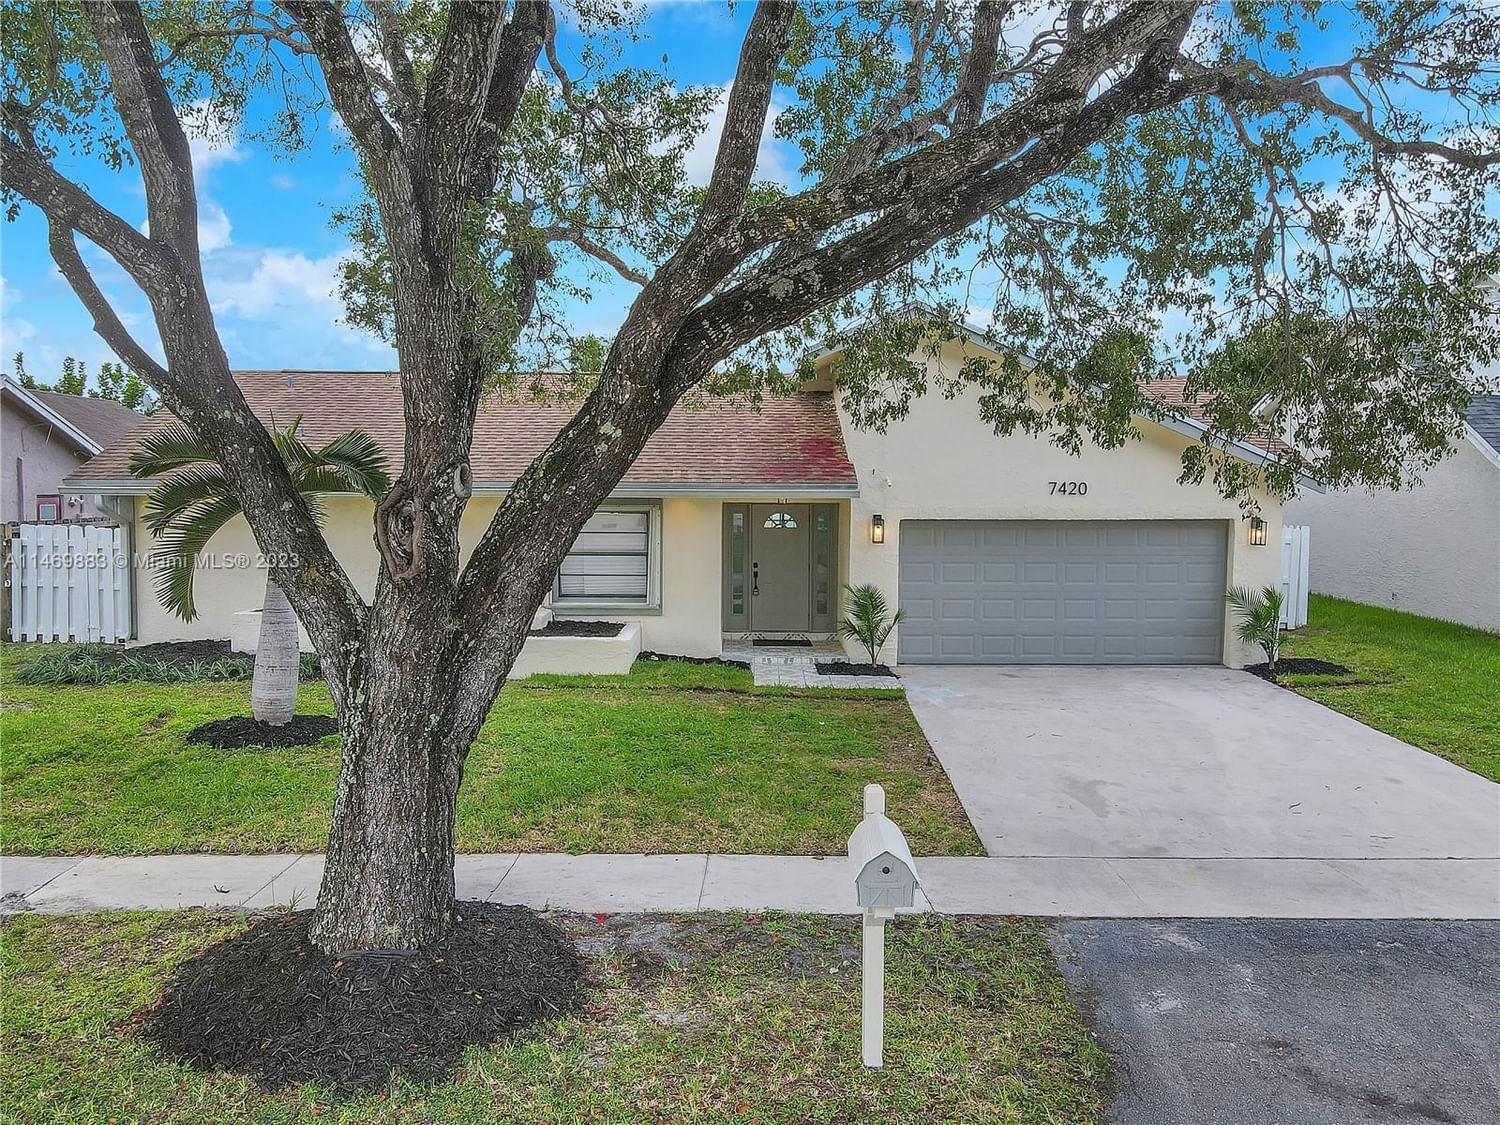 Real estate property located at 7420 41st Ct, Broward County, BOULEVARD NORTH, Lauderhill, FL